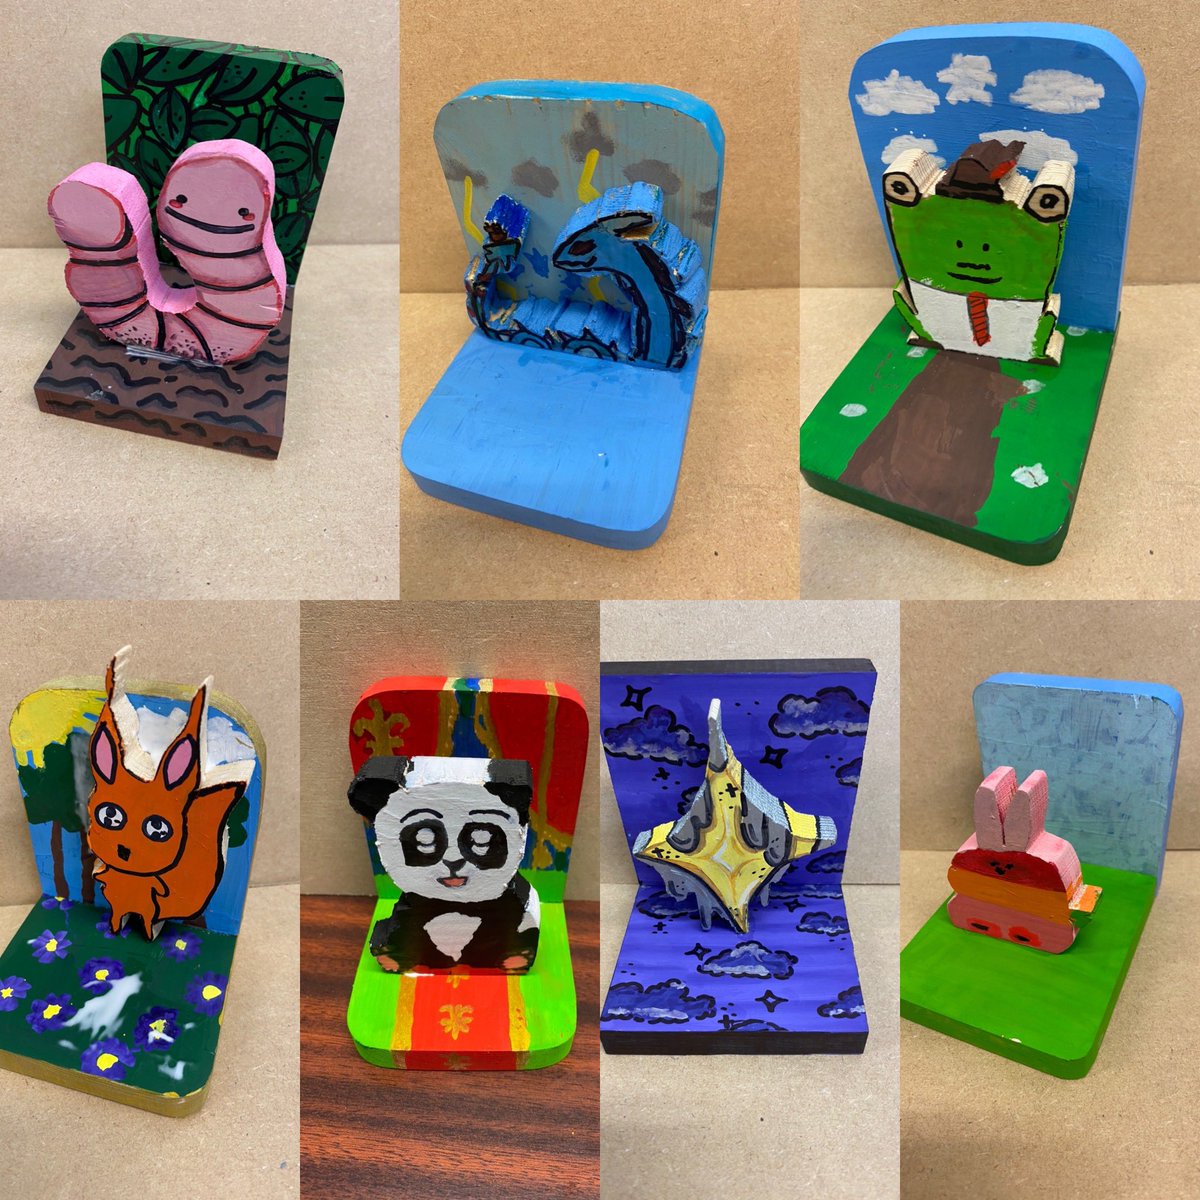 More of our #R13 bookend creations! Such a great variety of ideas and competent use of workshop tools. Well done everyone! #SJCDT